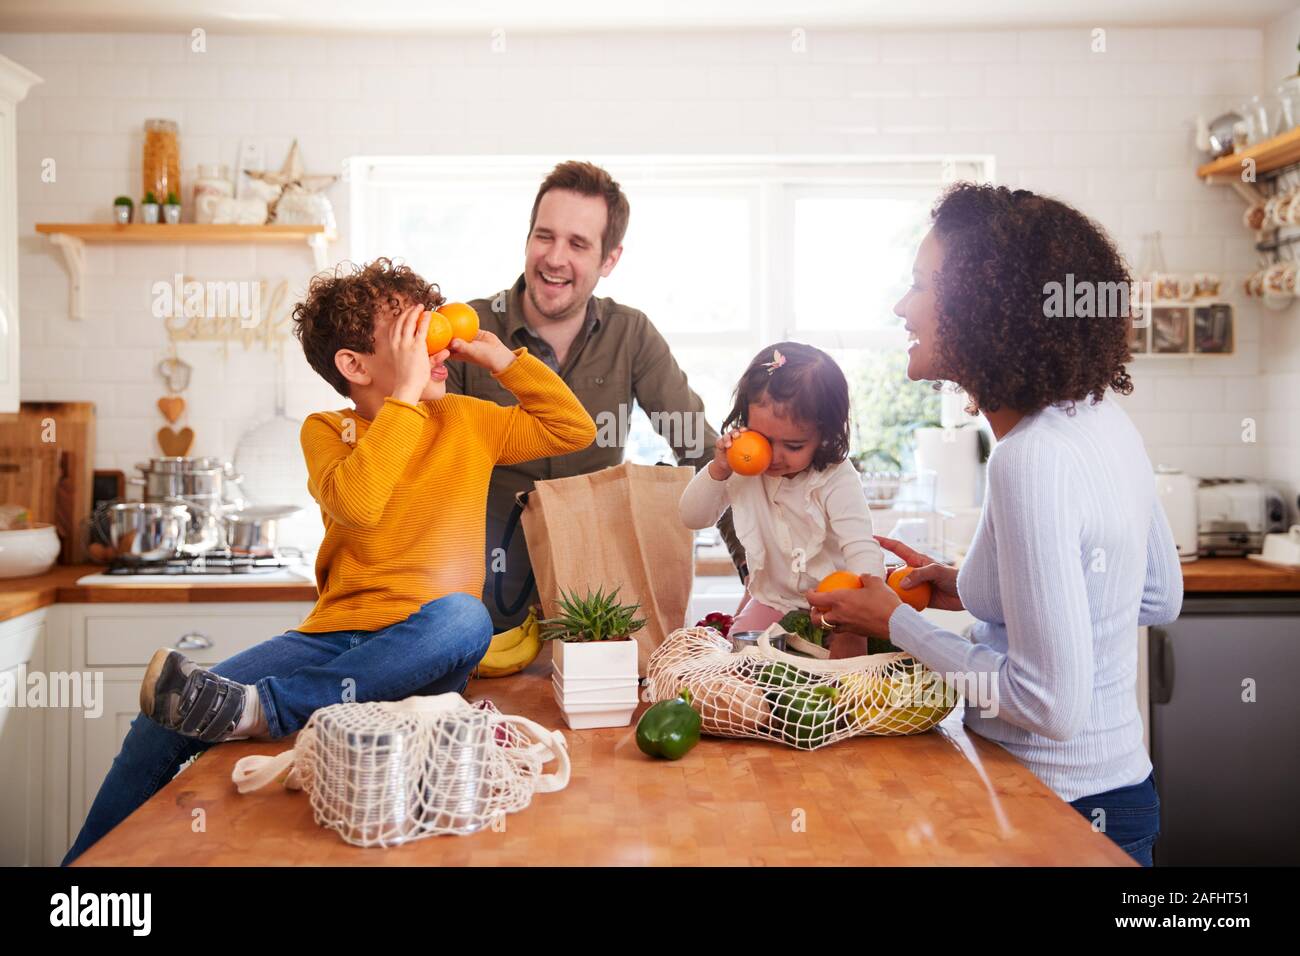 Family Returning Home From Shopping Trip Using Plastic Free Bags Unpacking Groceries In Kitchen Stock Photo